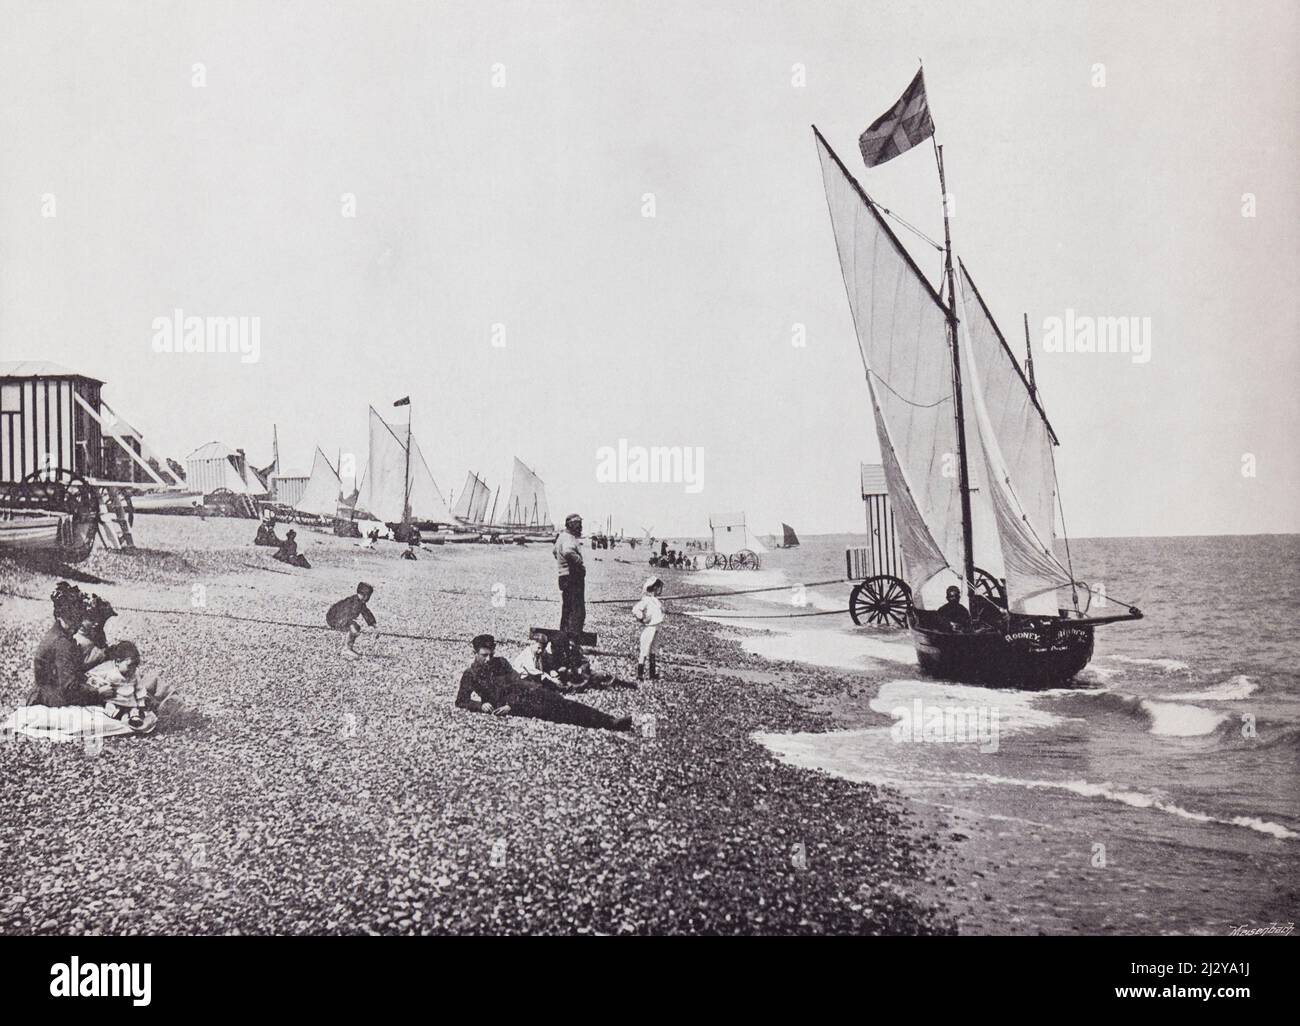 Aldeburgh, Suffolk, England, seen here in the 19th century.  From Around The Coast,  An Album of Pictures from Photographs of the Chief Seaside Places of Interest in Great Britain and Ireland published London, 1895, by George Newnes Limited. Stock Photo